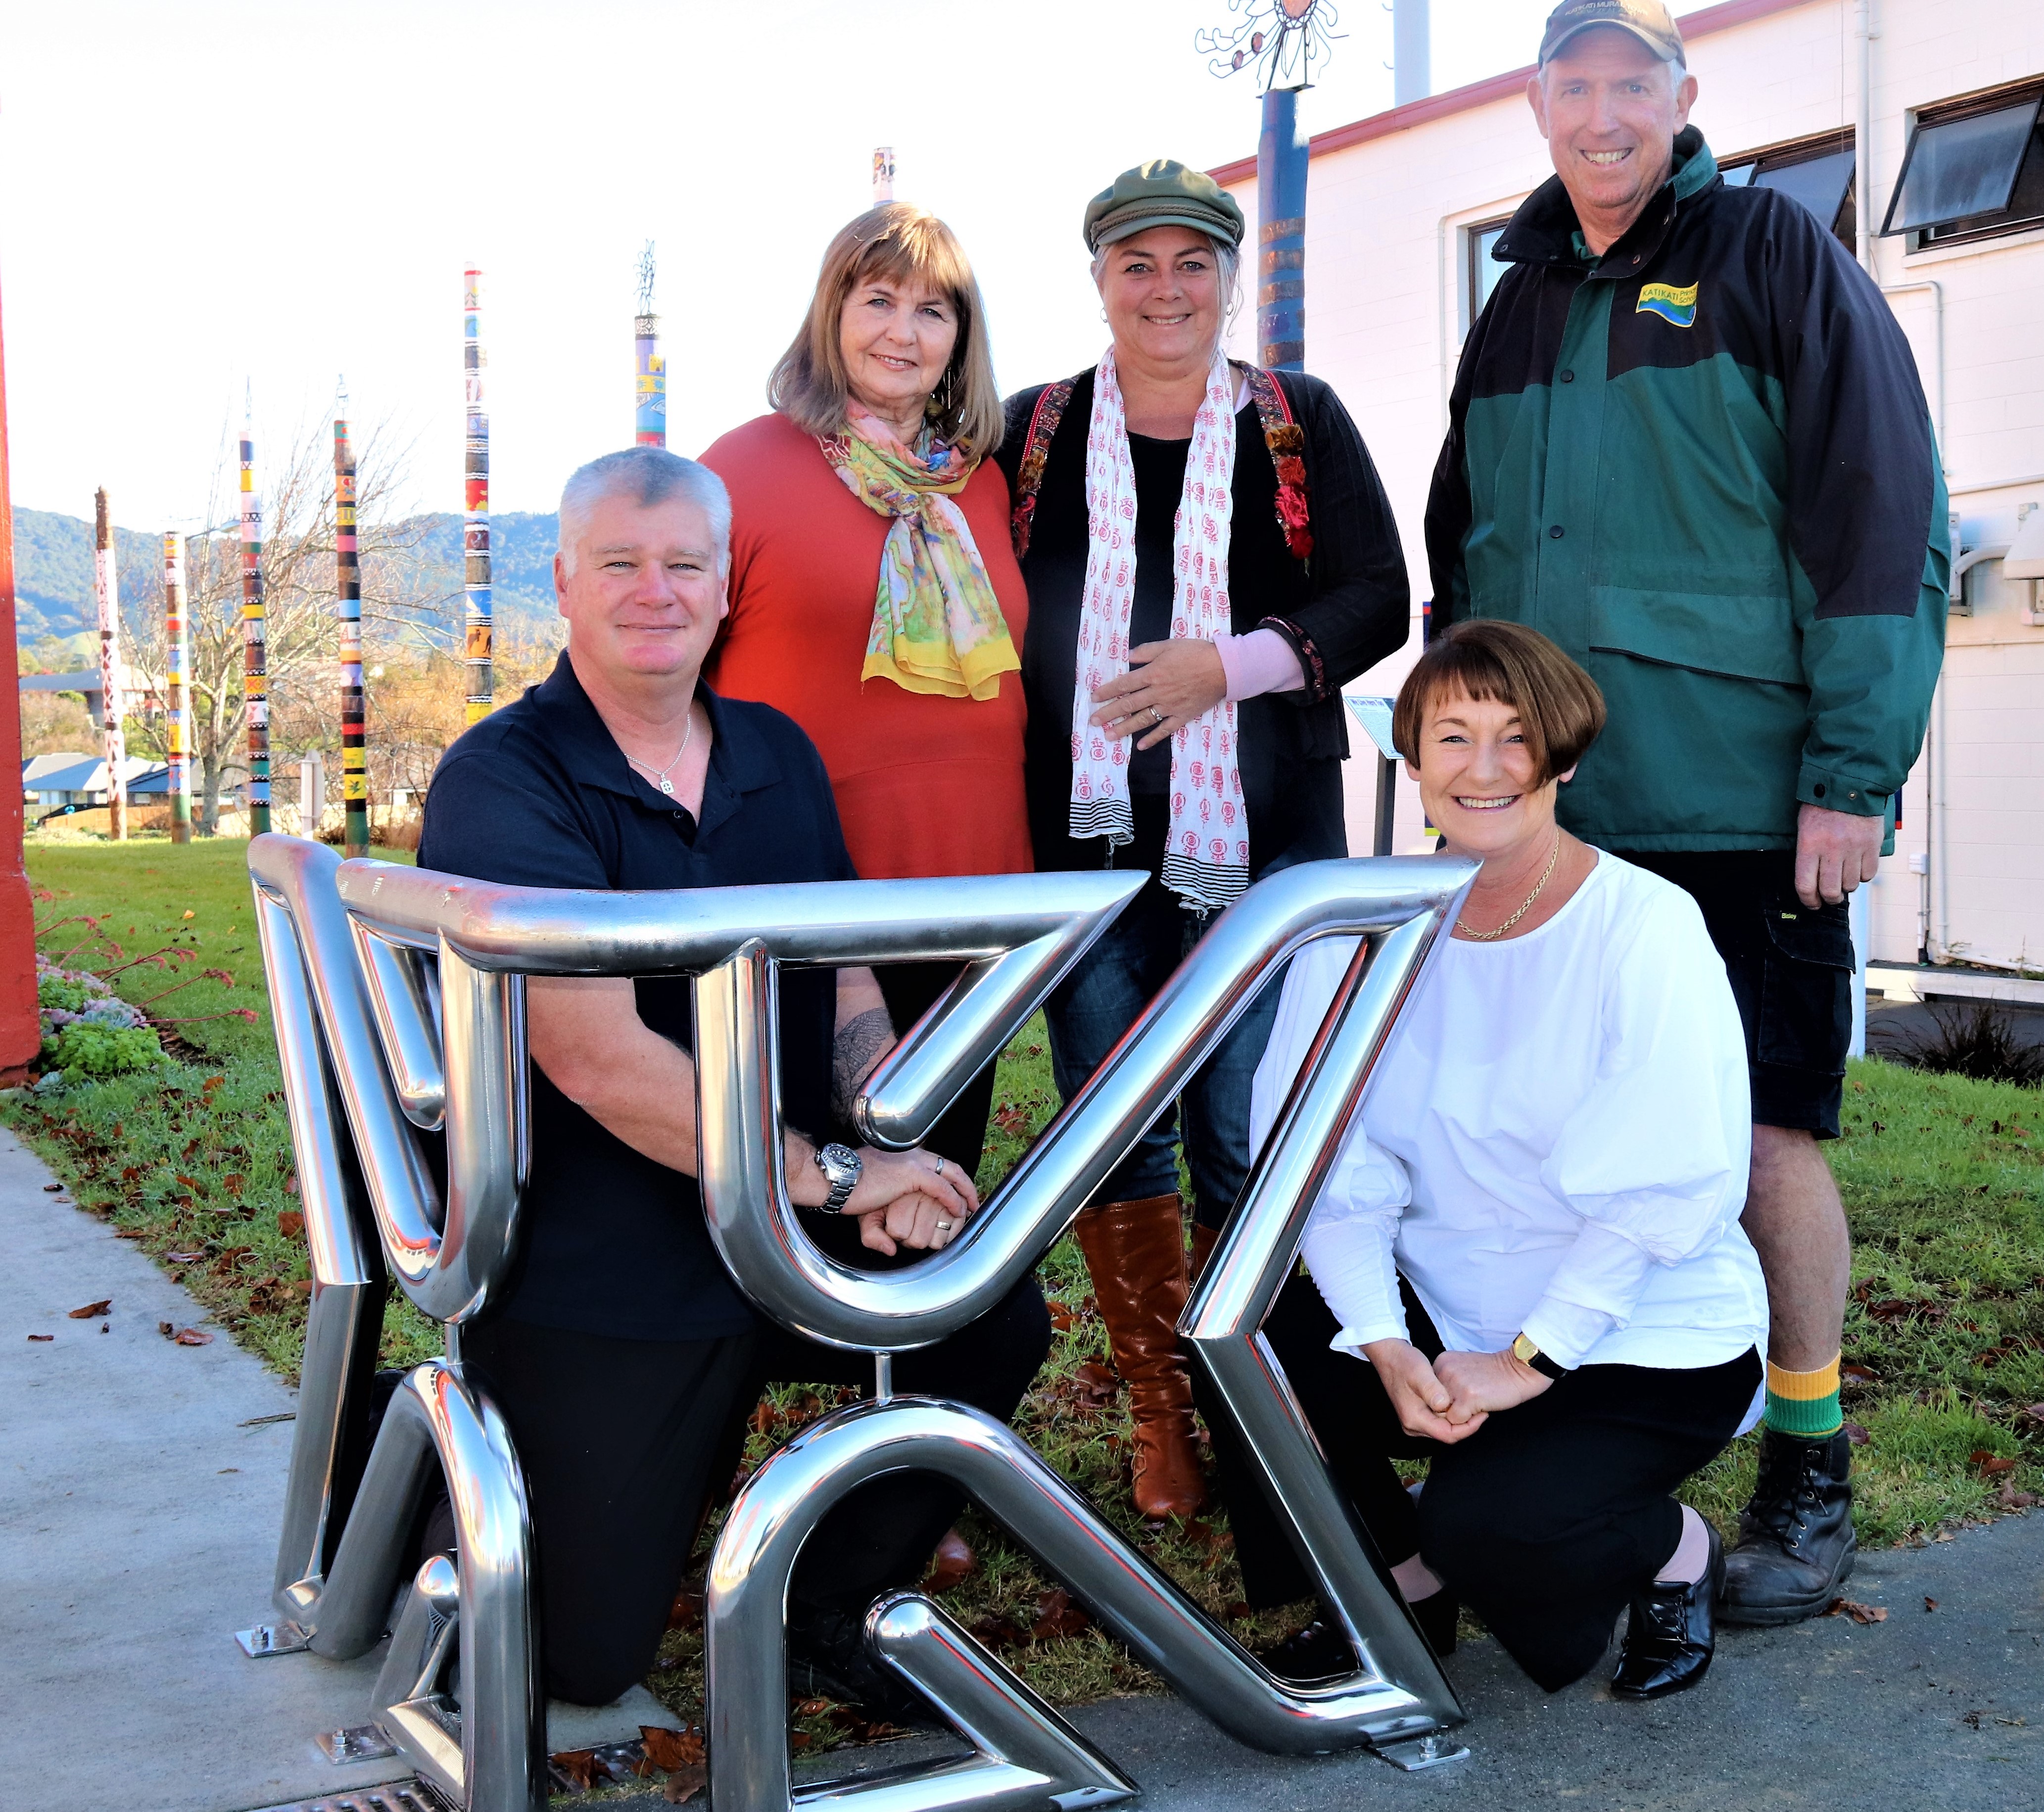 Bike rack artist Keith Lewis, Western Bay Councillor and Open-Air Arts Committee member Anne Henry, Katch Katikati Coordinator Jacqui Knight, Open-Air Art Chair Steve Graveson and Western Bay Museum Manager Paula Gaelic with the newly installed bike rack.​